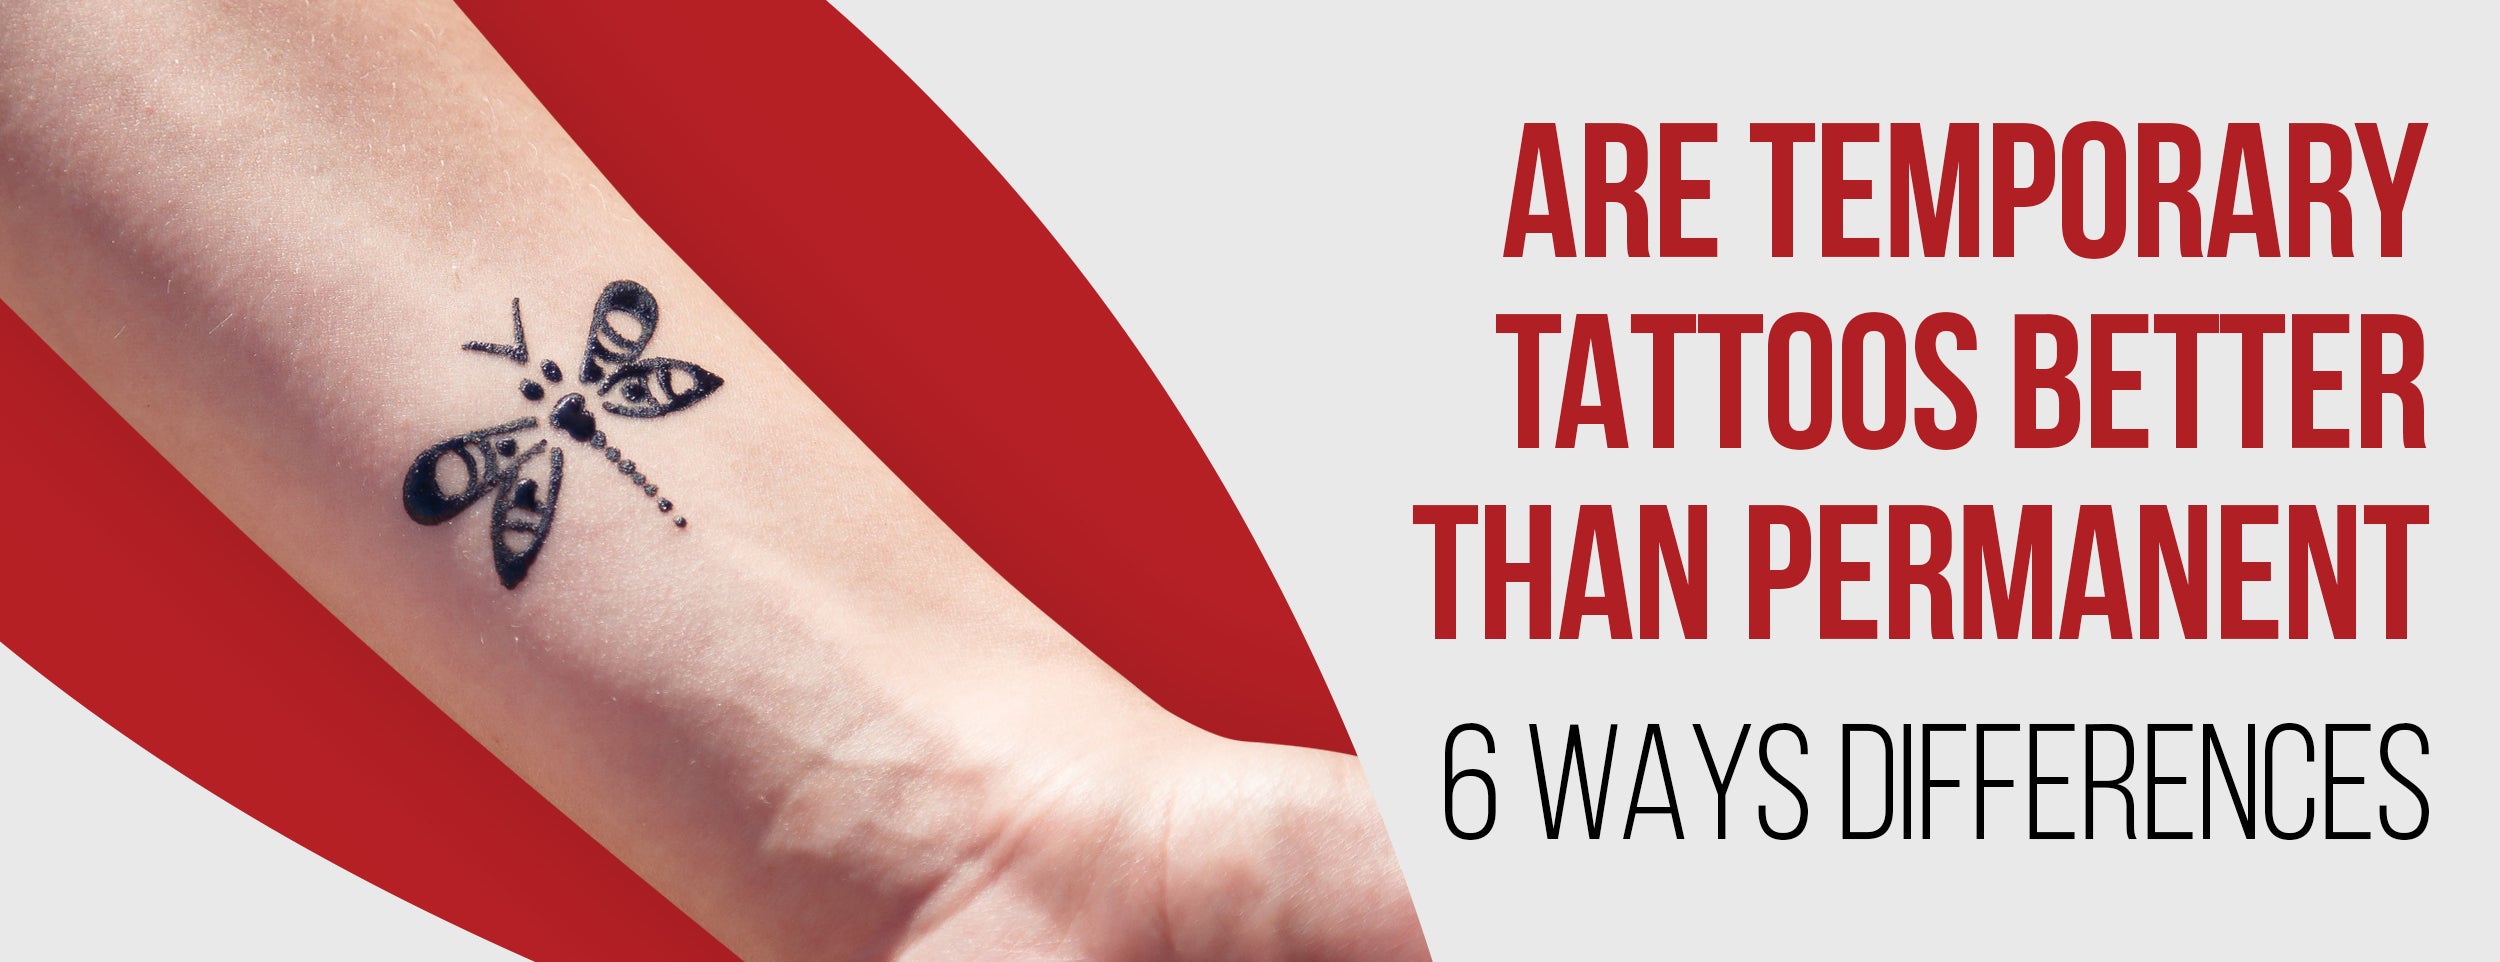 Stuck With A Permanent Tattoo? Here Are 4 Safe Ways To Get Rid Of It |  OnlyMyHealth